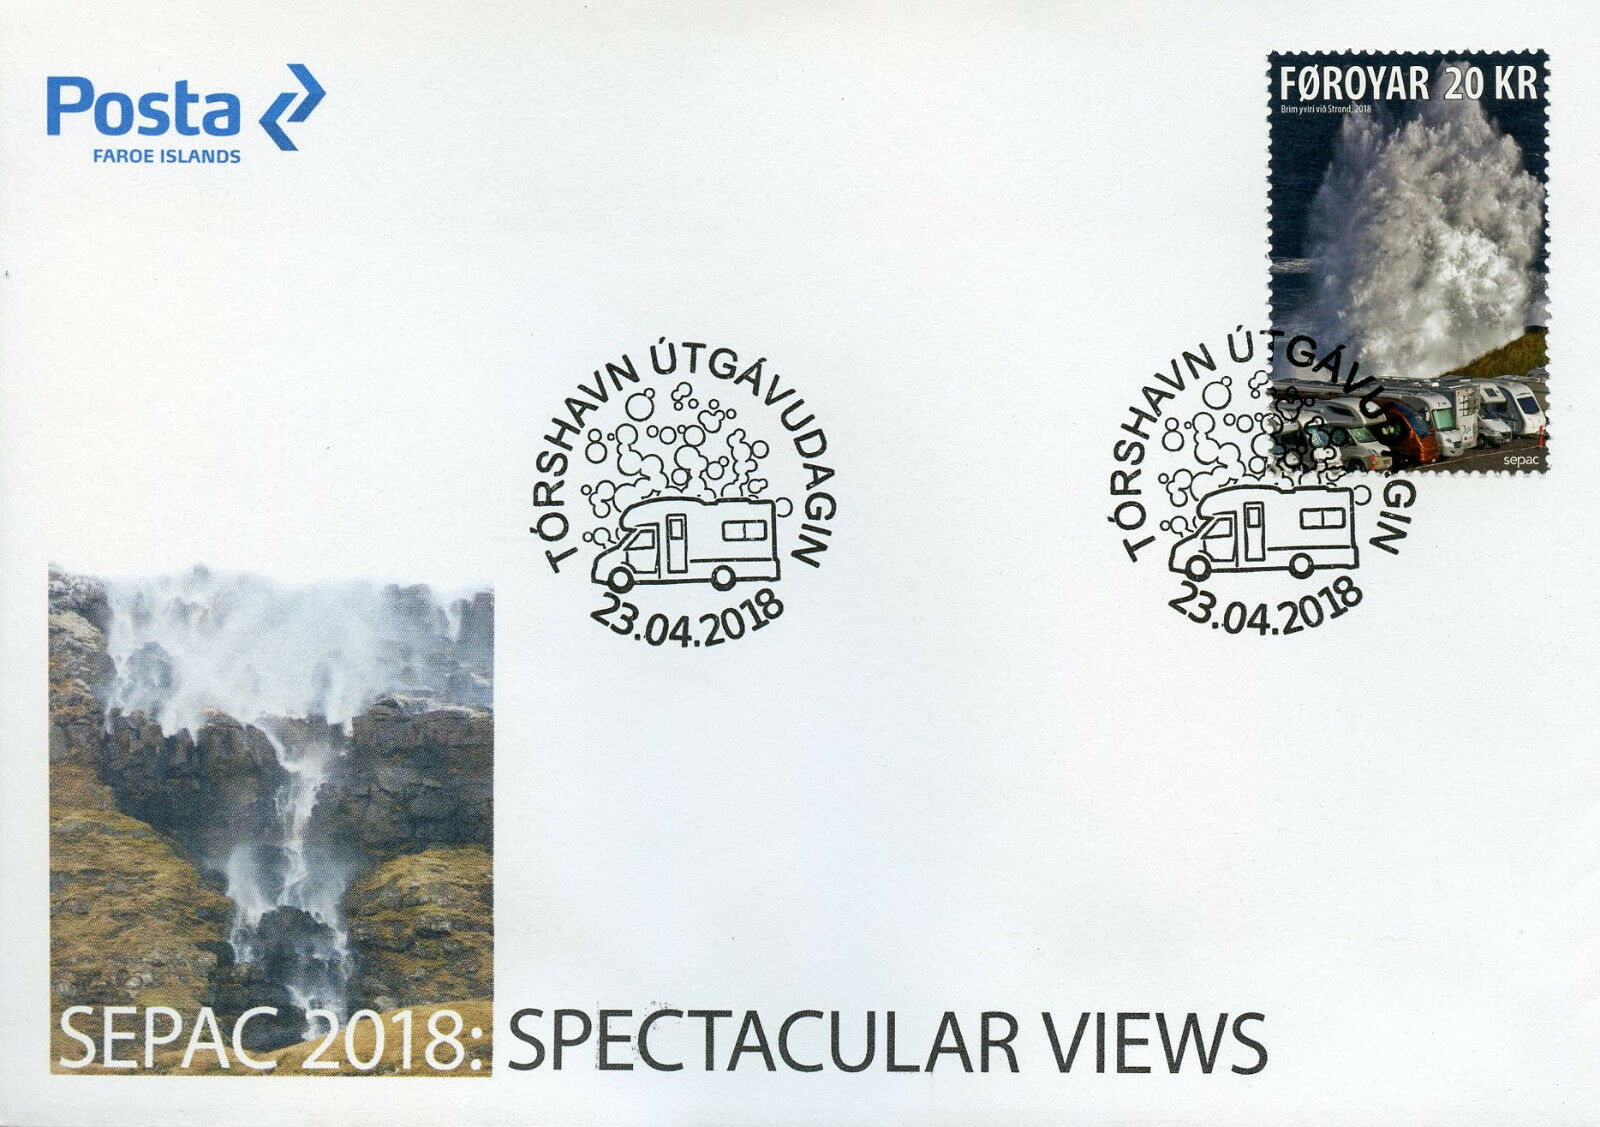 Faroes Faroe Islands 2018 FDC Spectacular Views SEPAC 1v Cover Tourism Stamps